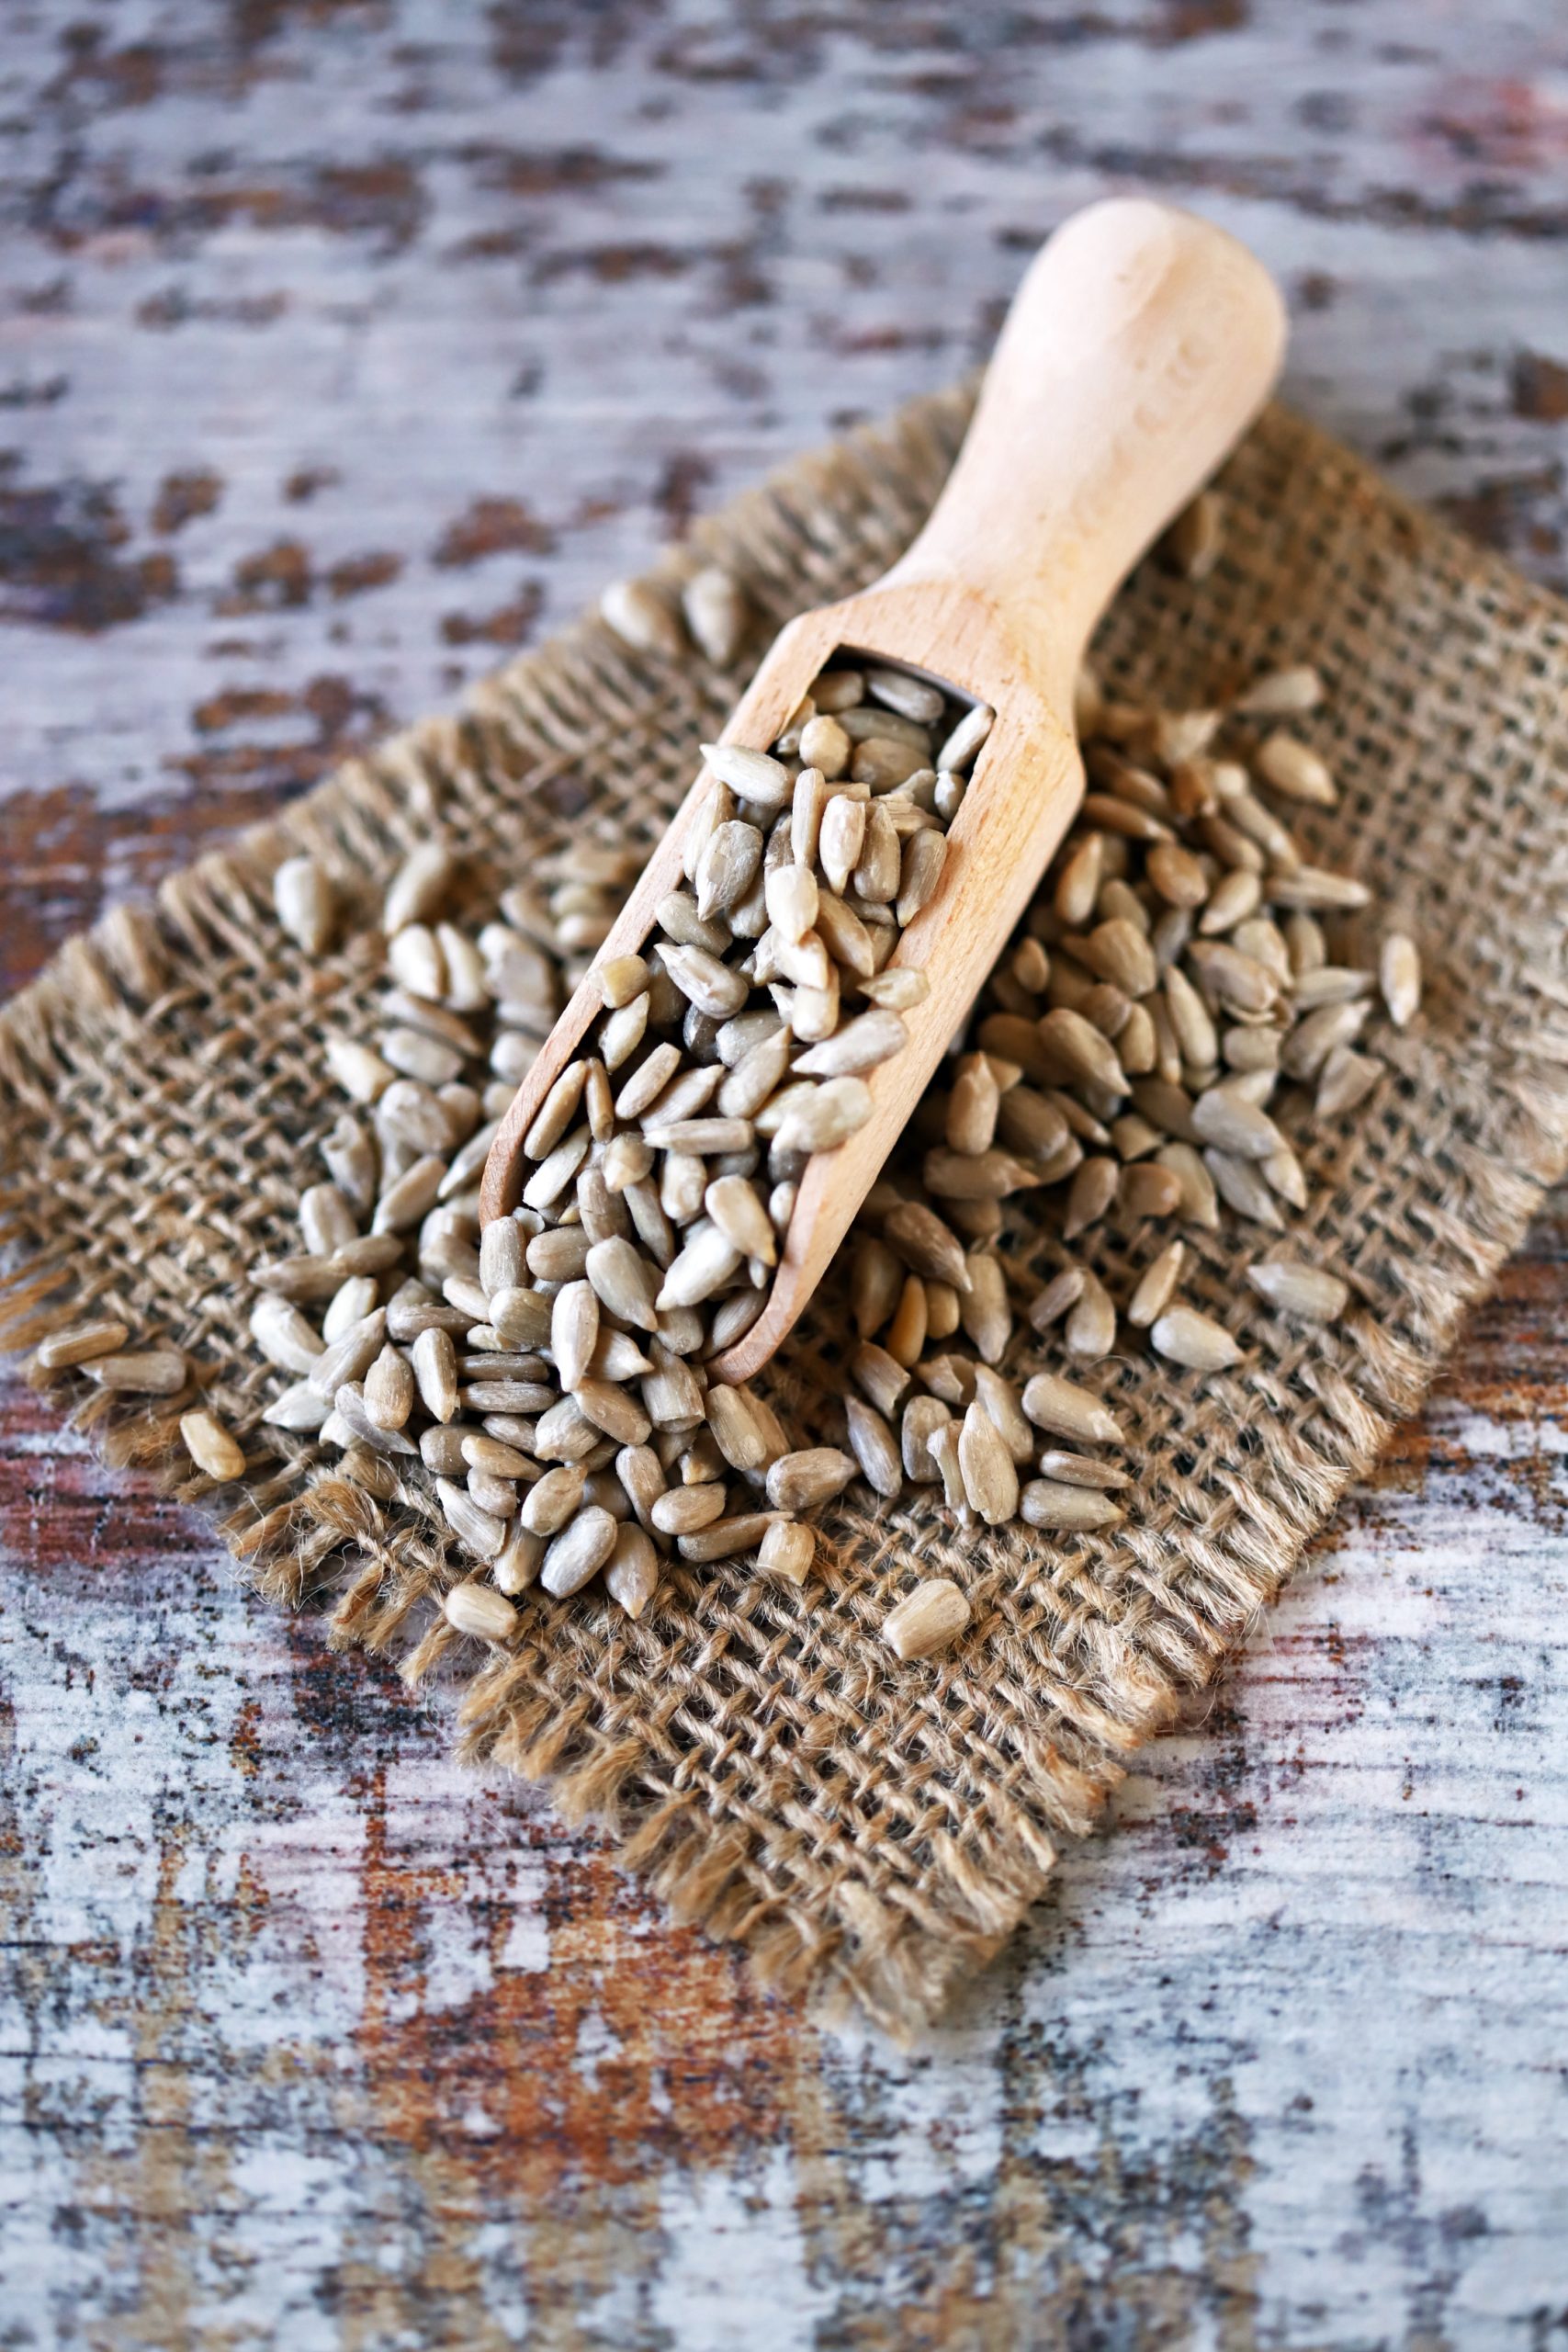 A wooden scoop filled with raw sunflower seeds, a substitute for wheat germ in recipes, on a burlap cloth with a rustic wood background.